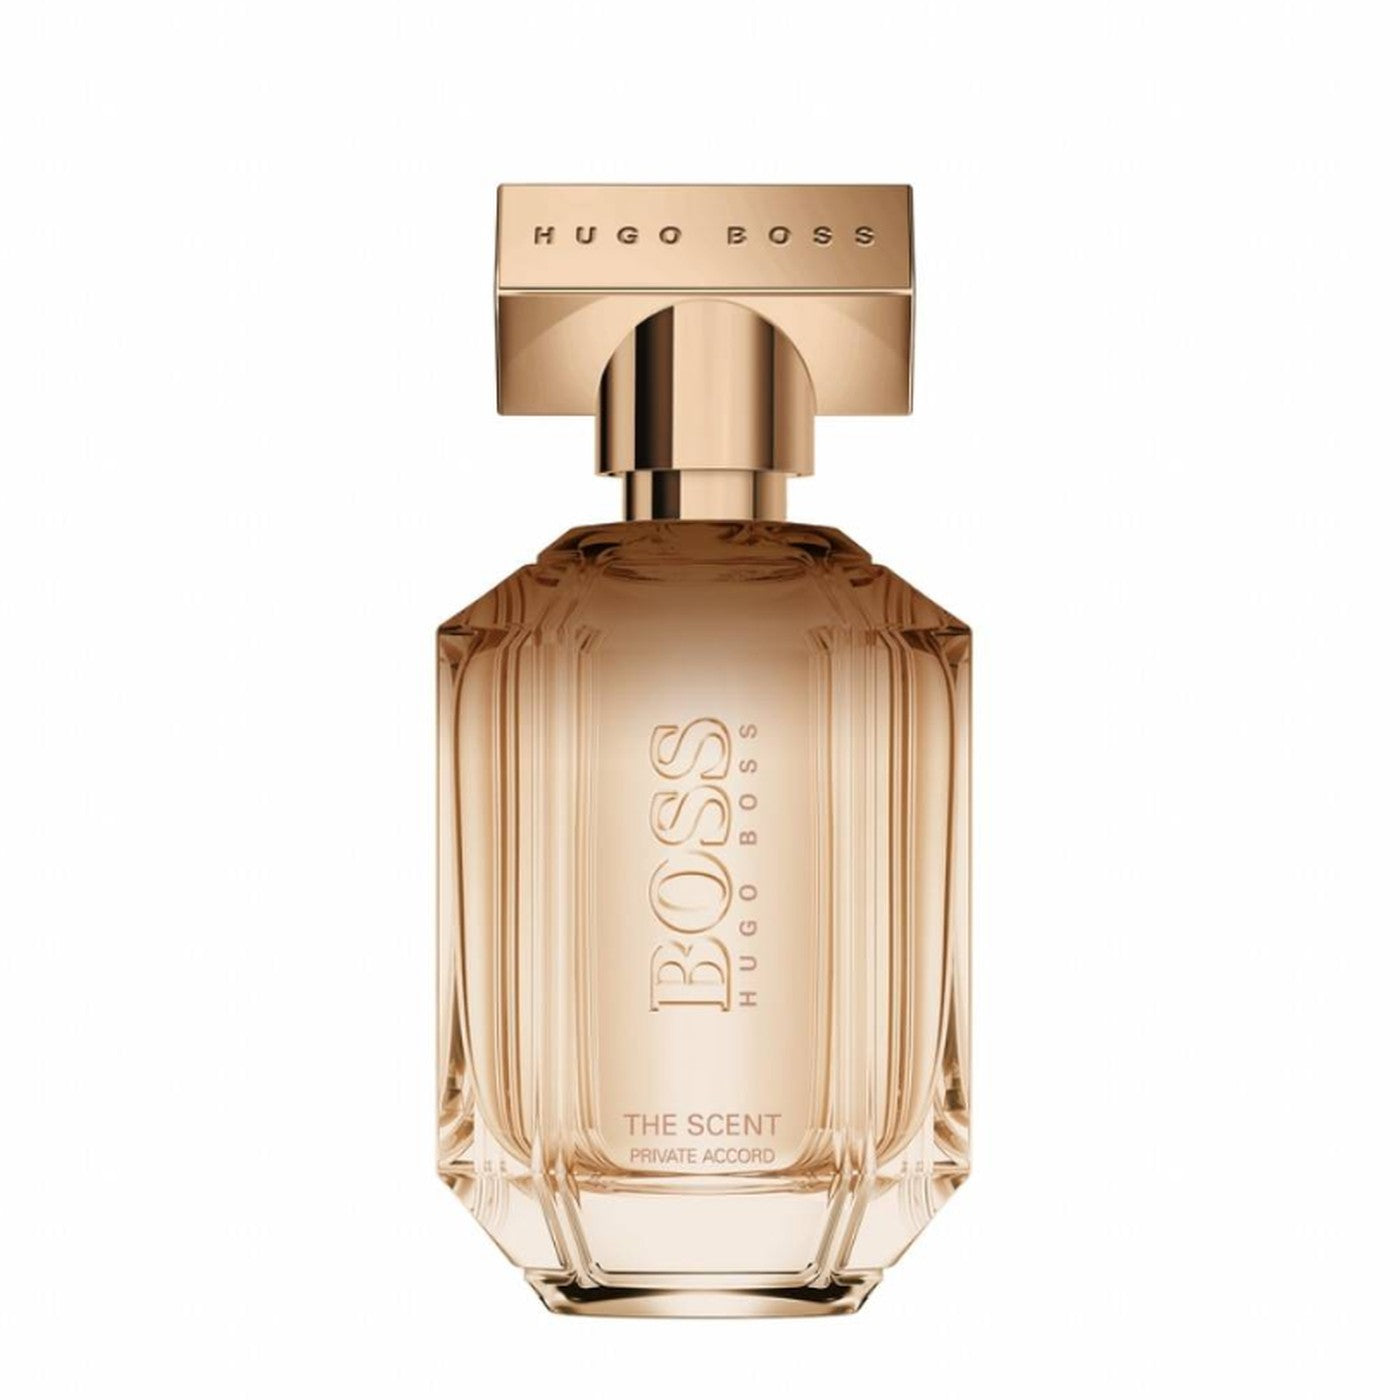 Hugo Boss The Scent Private Accord Eau De Parfum 100ml for Her